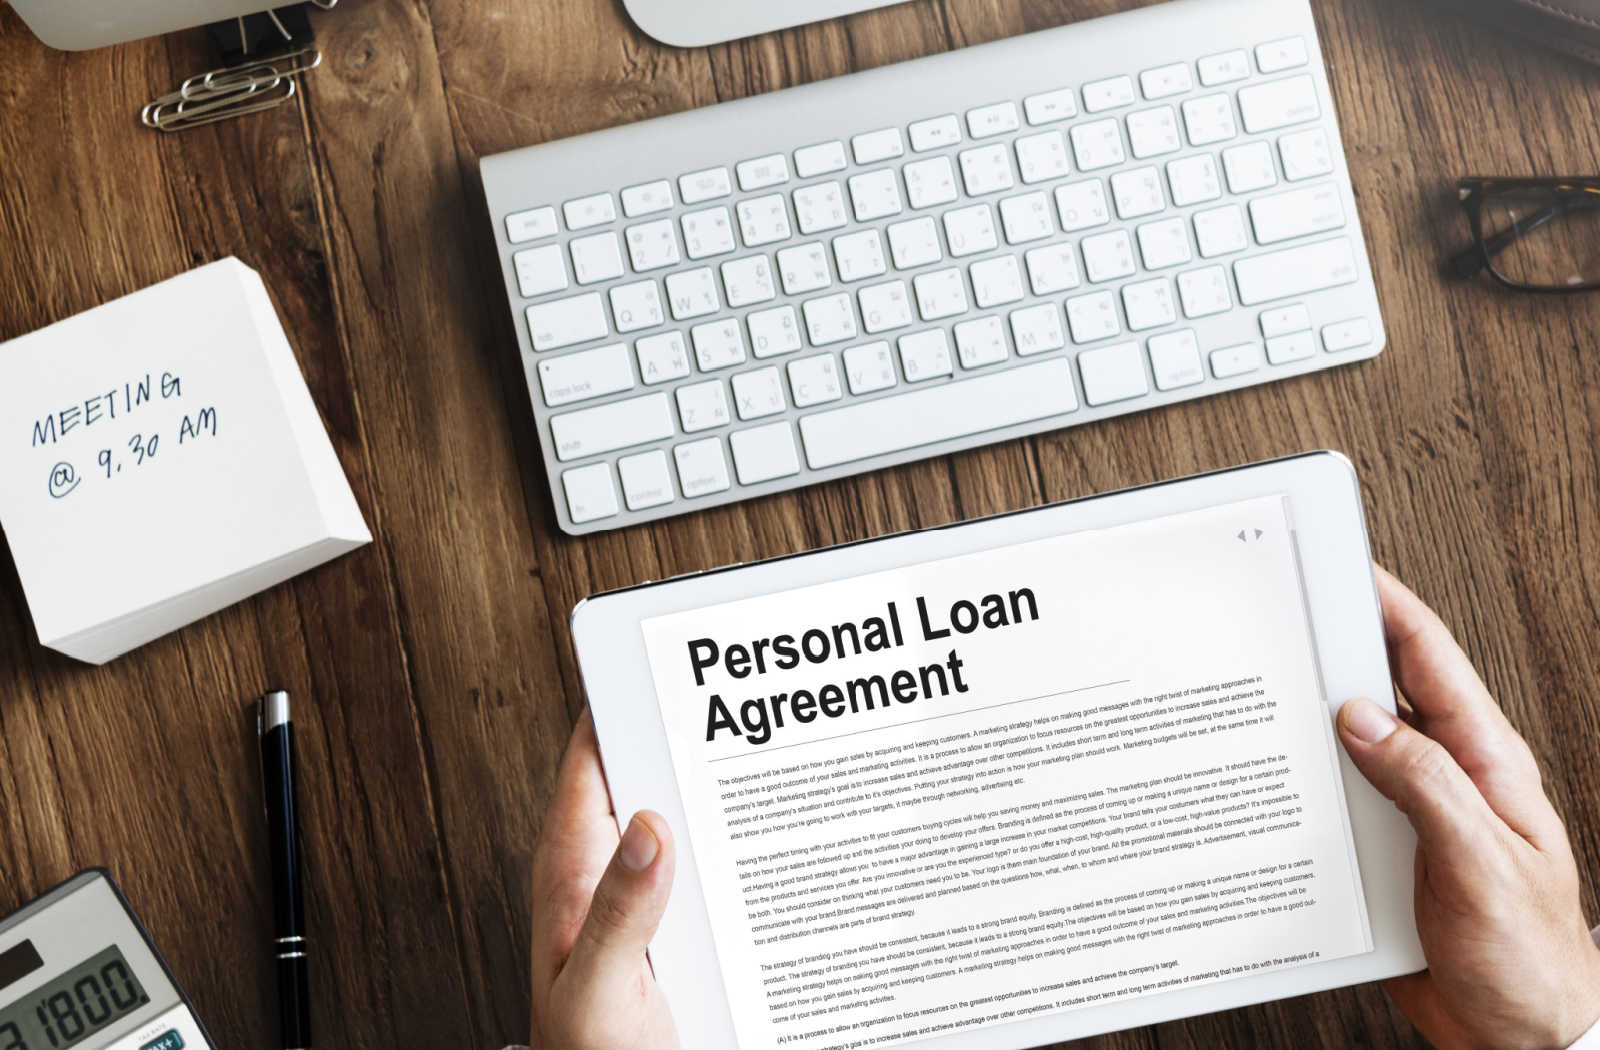 A male hand is holding an Ipad and on the Ipad screen is a written personal loan agreement.